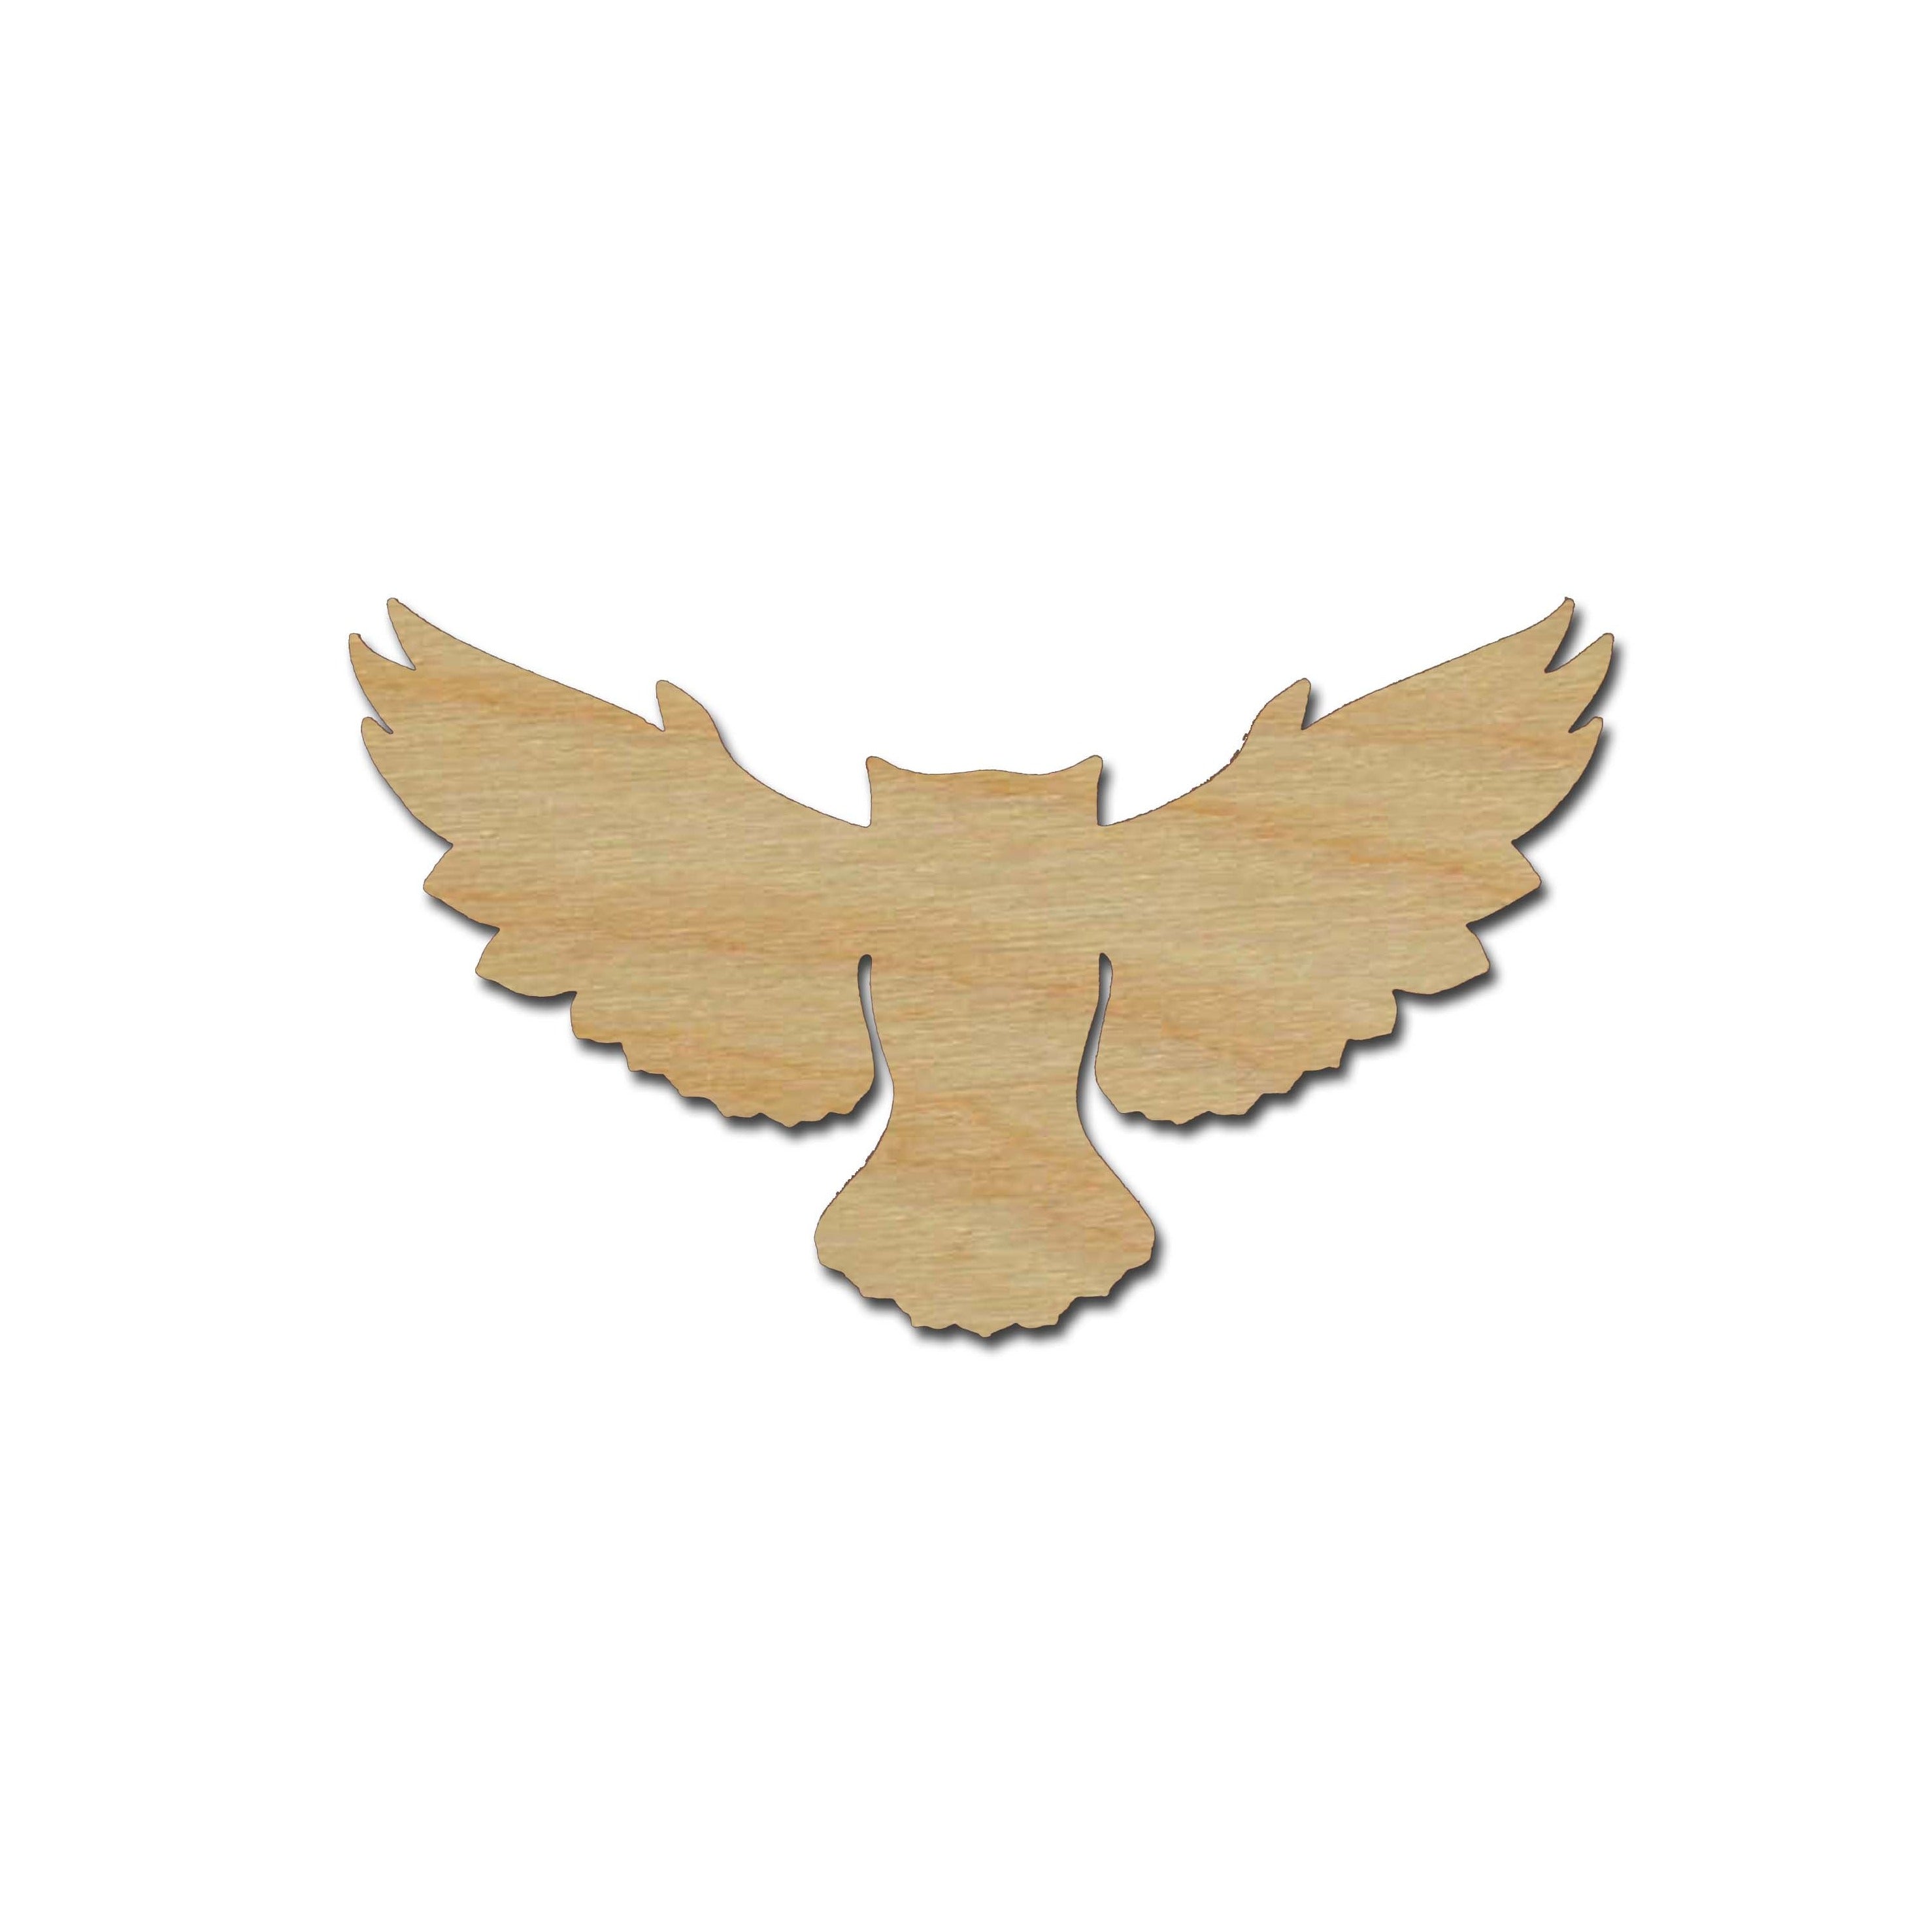 Owl Flying Wood Cut Out #03